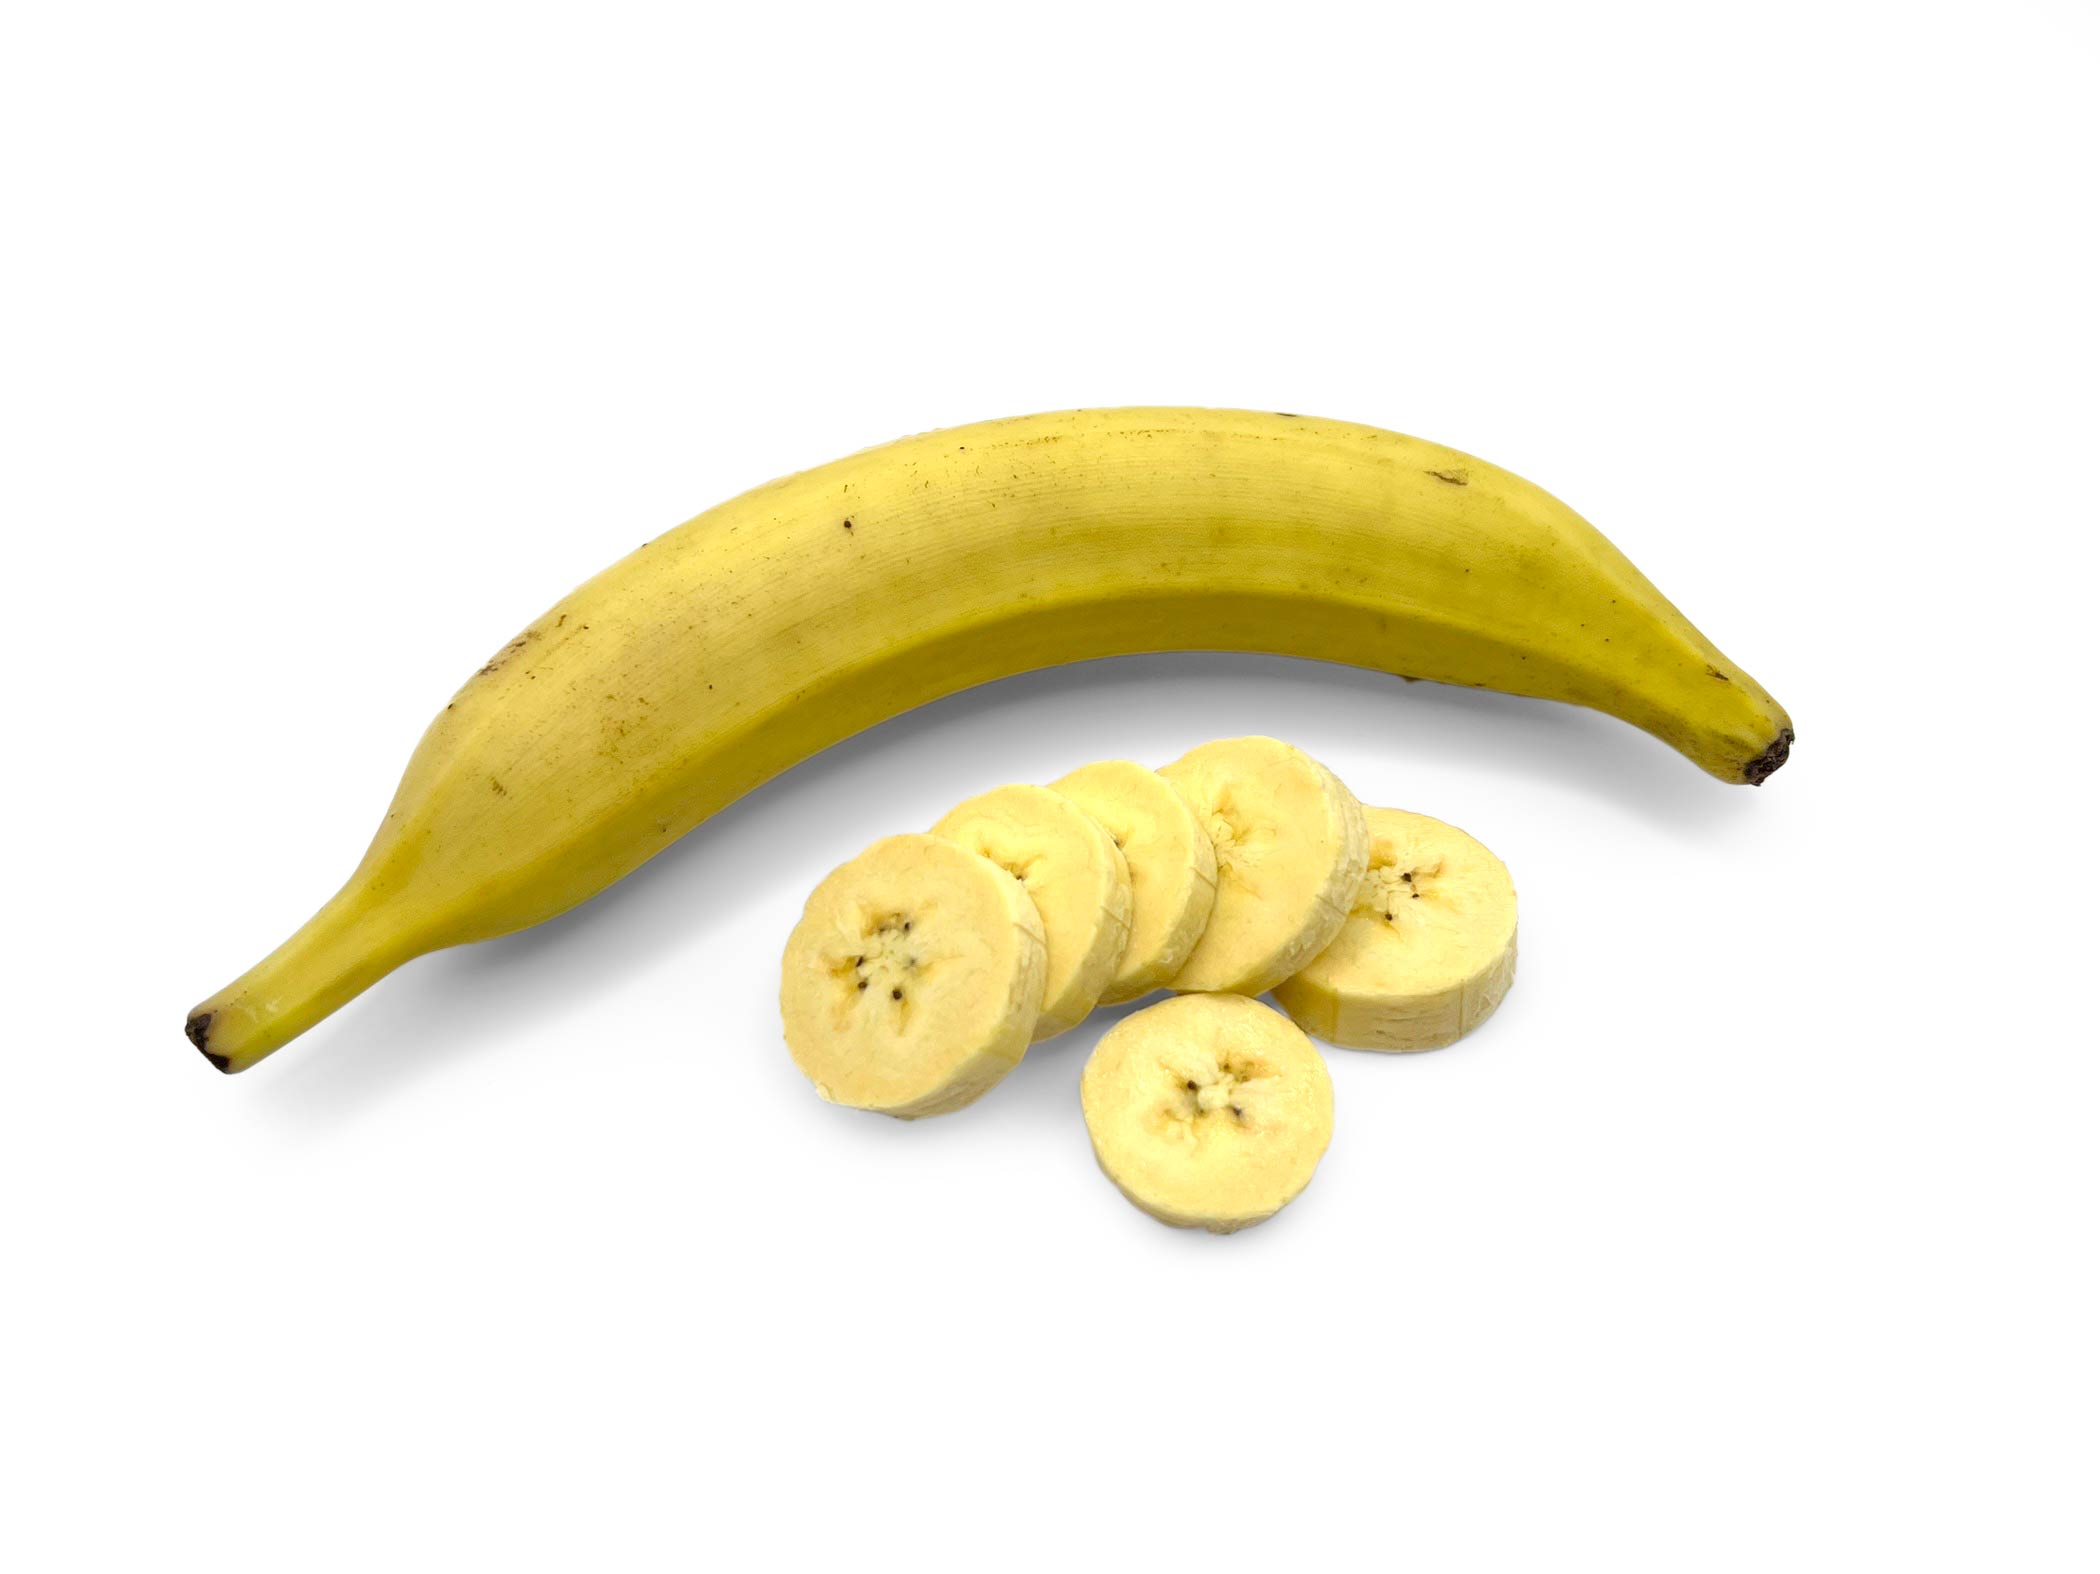 Are plantains good for kidneys?